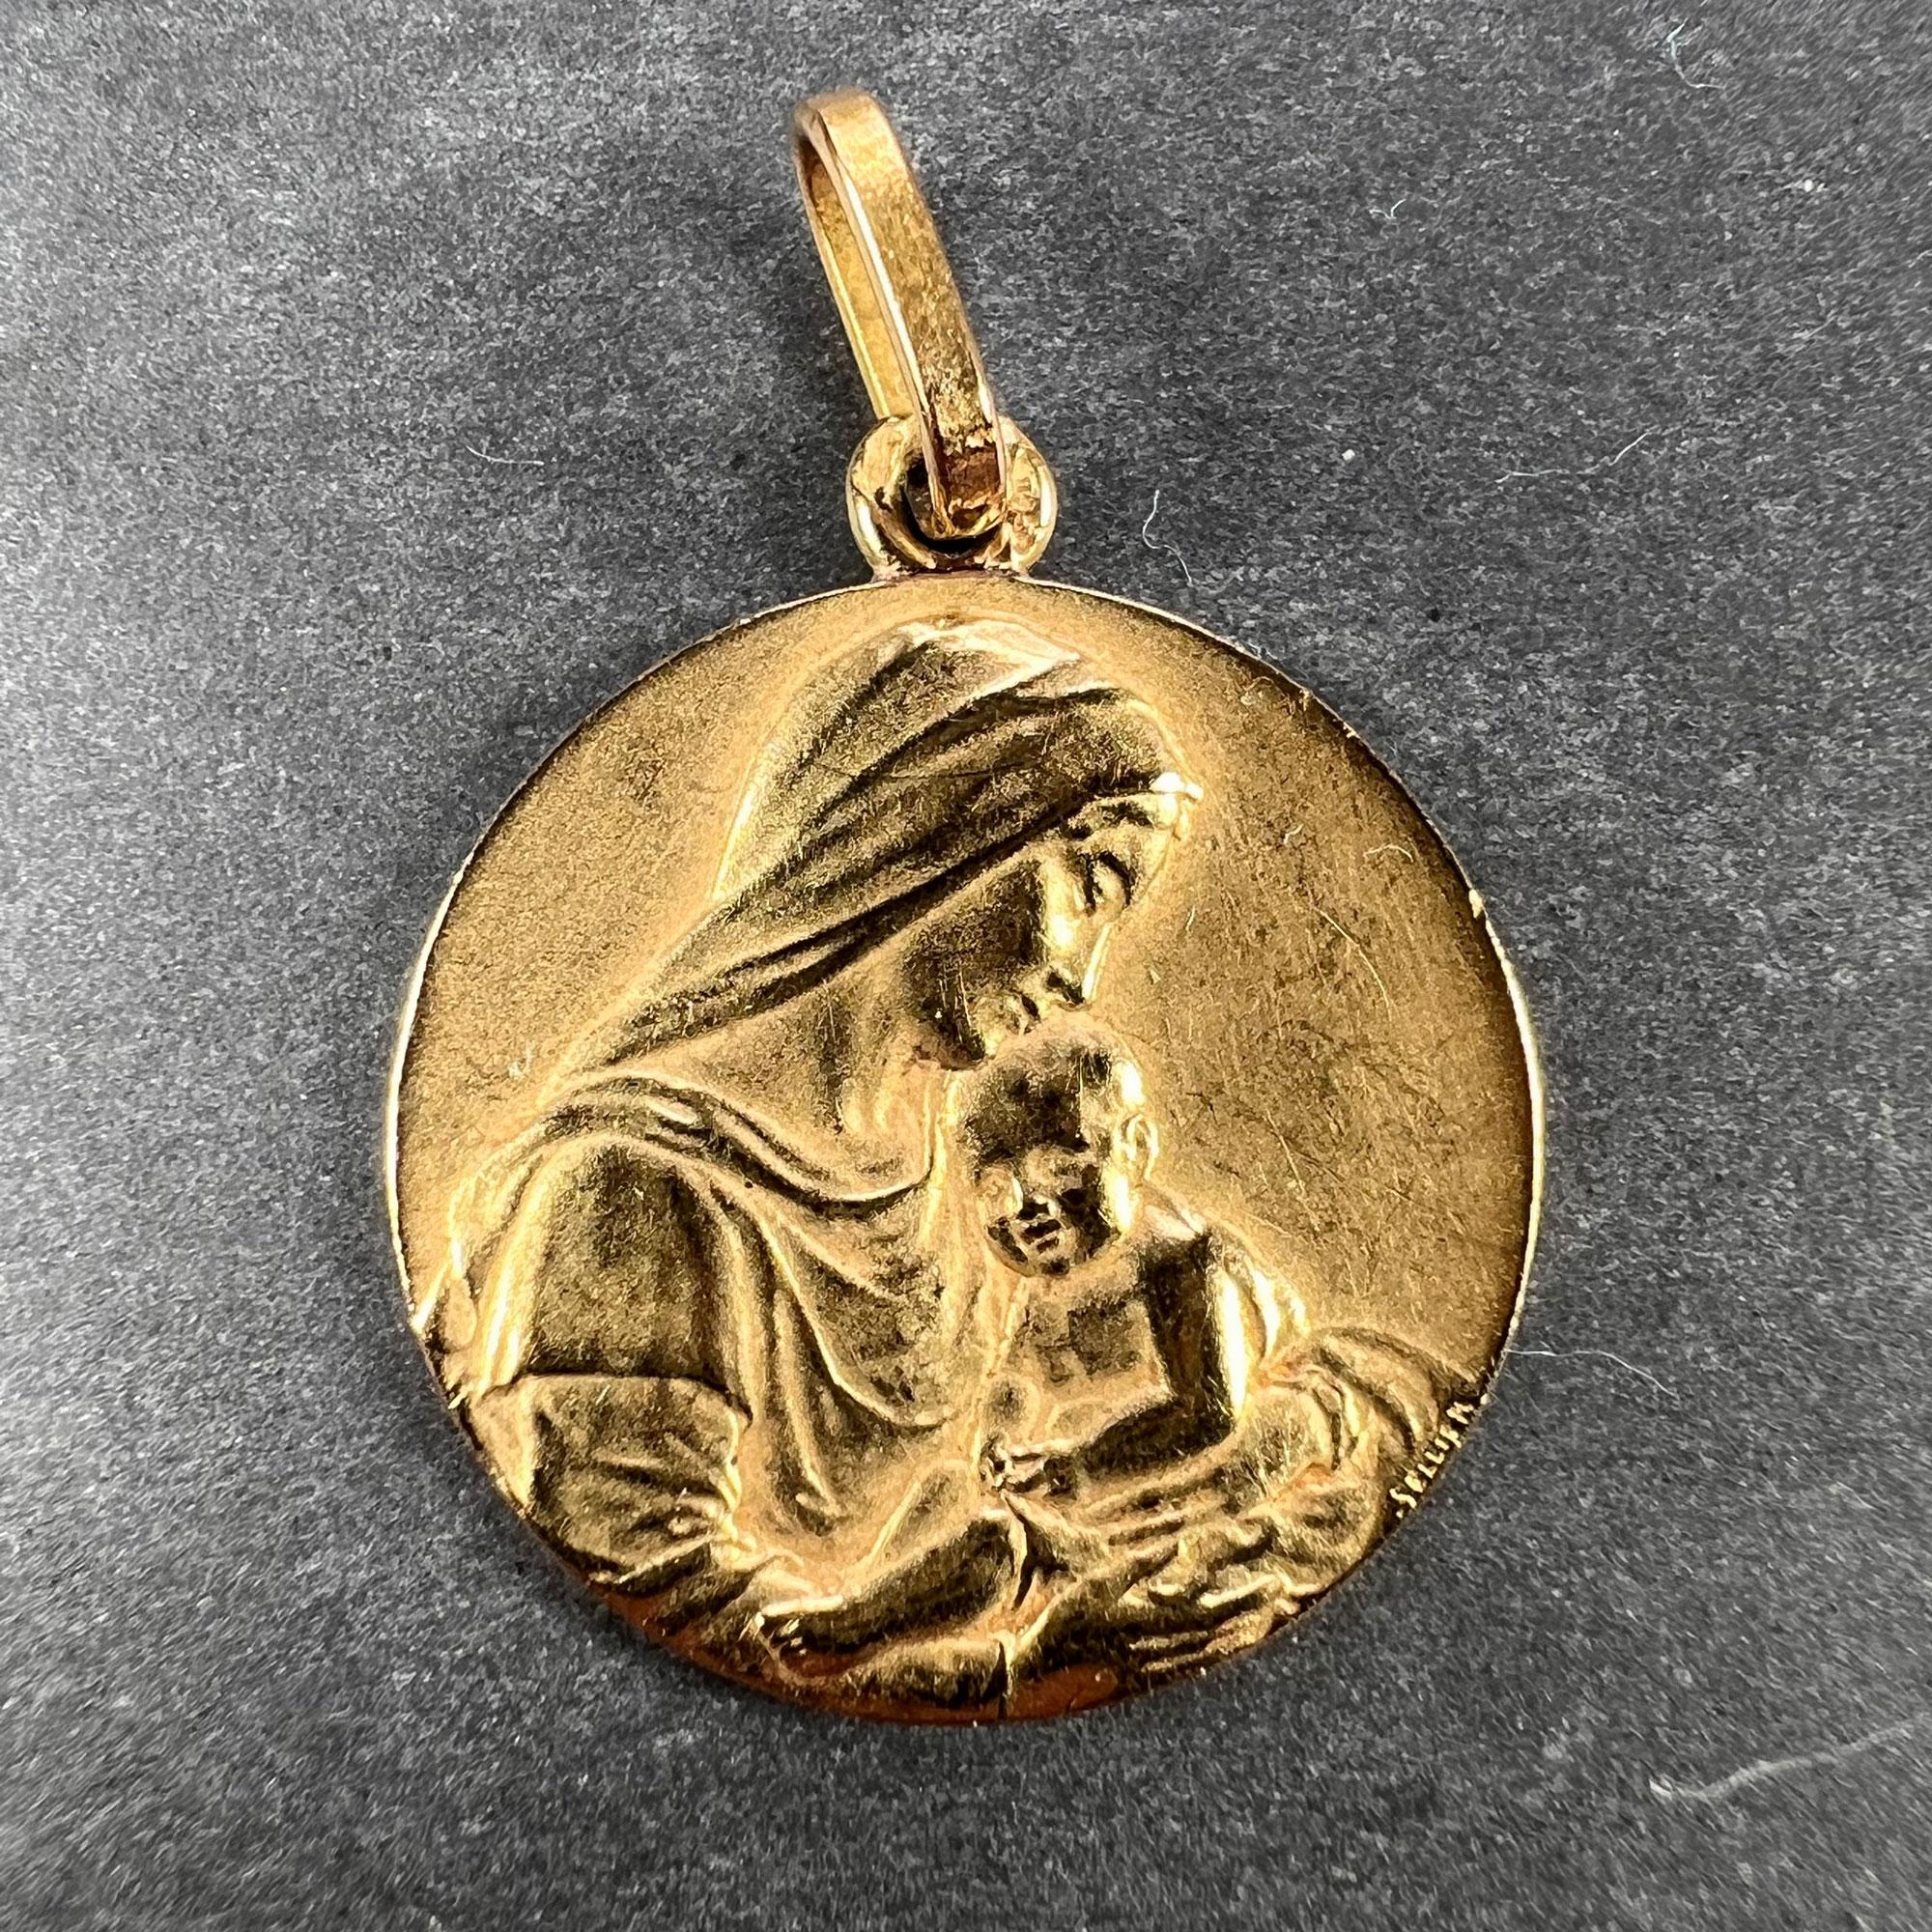 A French 18 karat (18K) yellow gold charm pendant designed as a medal depicting the Madonna and Child signed by Sellier. Stamped with the eagle’s head mark for 18 karat gold and French manufacture, and an unknown maker’s mark.
Dimensions: 2.2 x 1.8